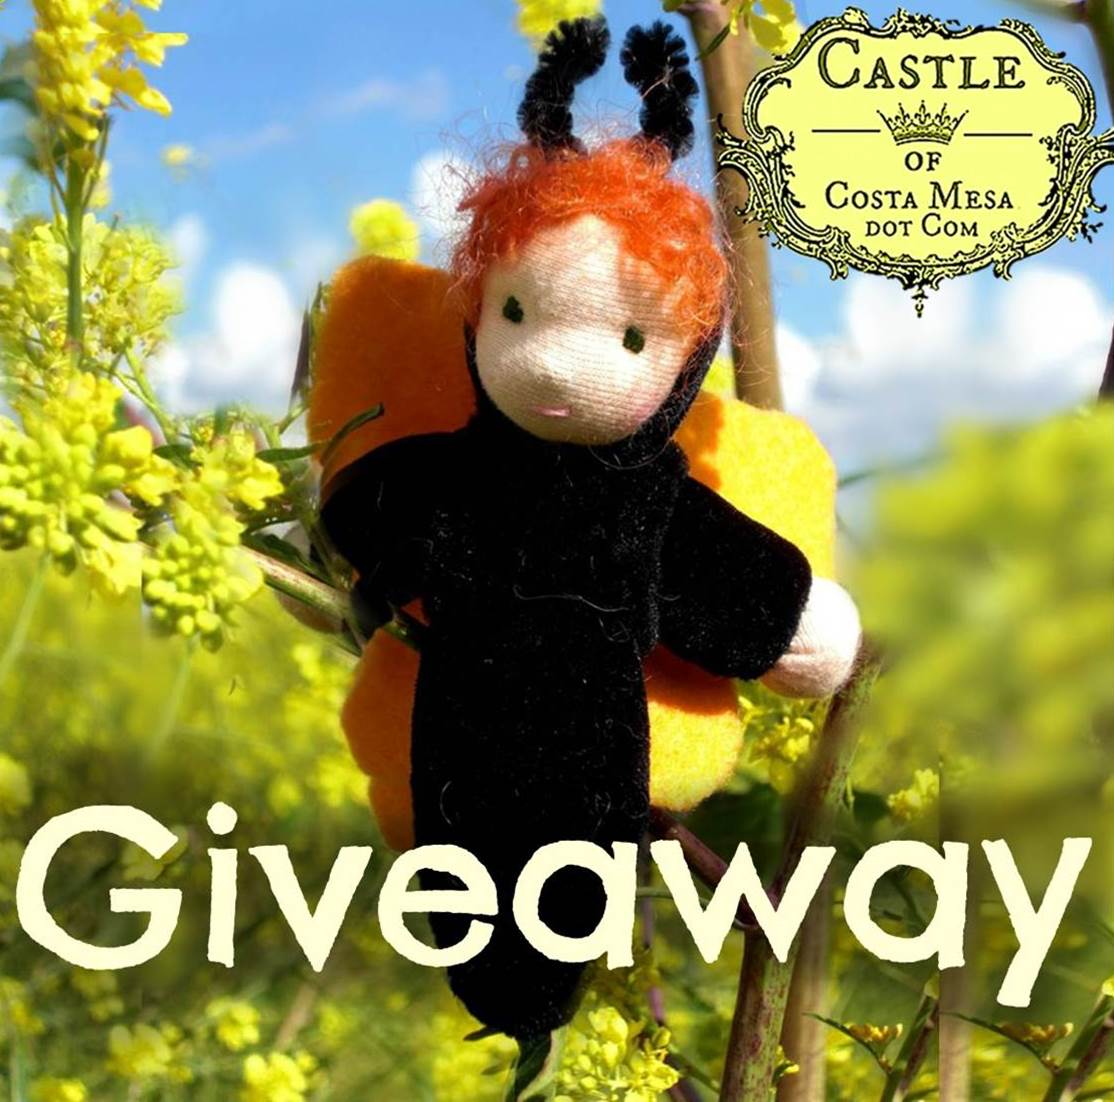 Enter to win a Handmade Caterpillar Doll That Turns Into a Butterfly - Ends 03/18/13